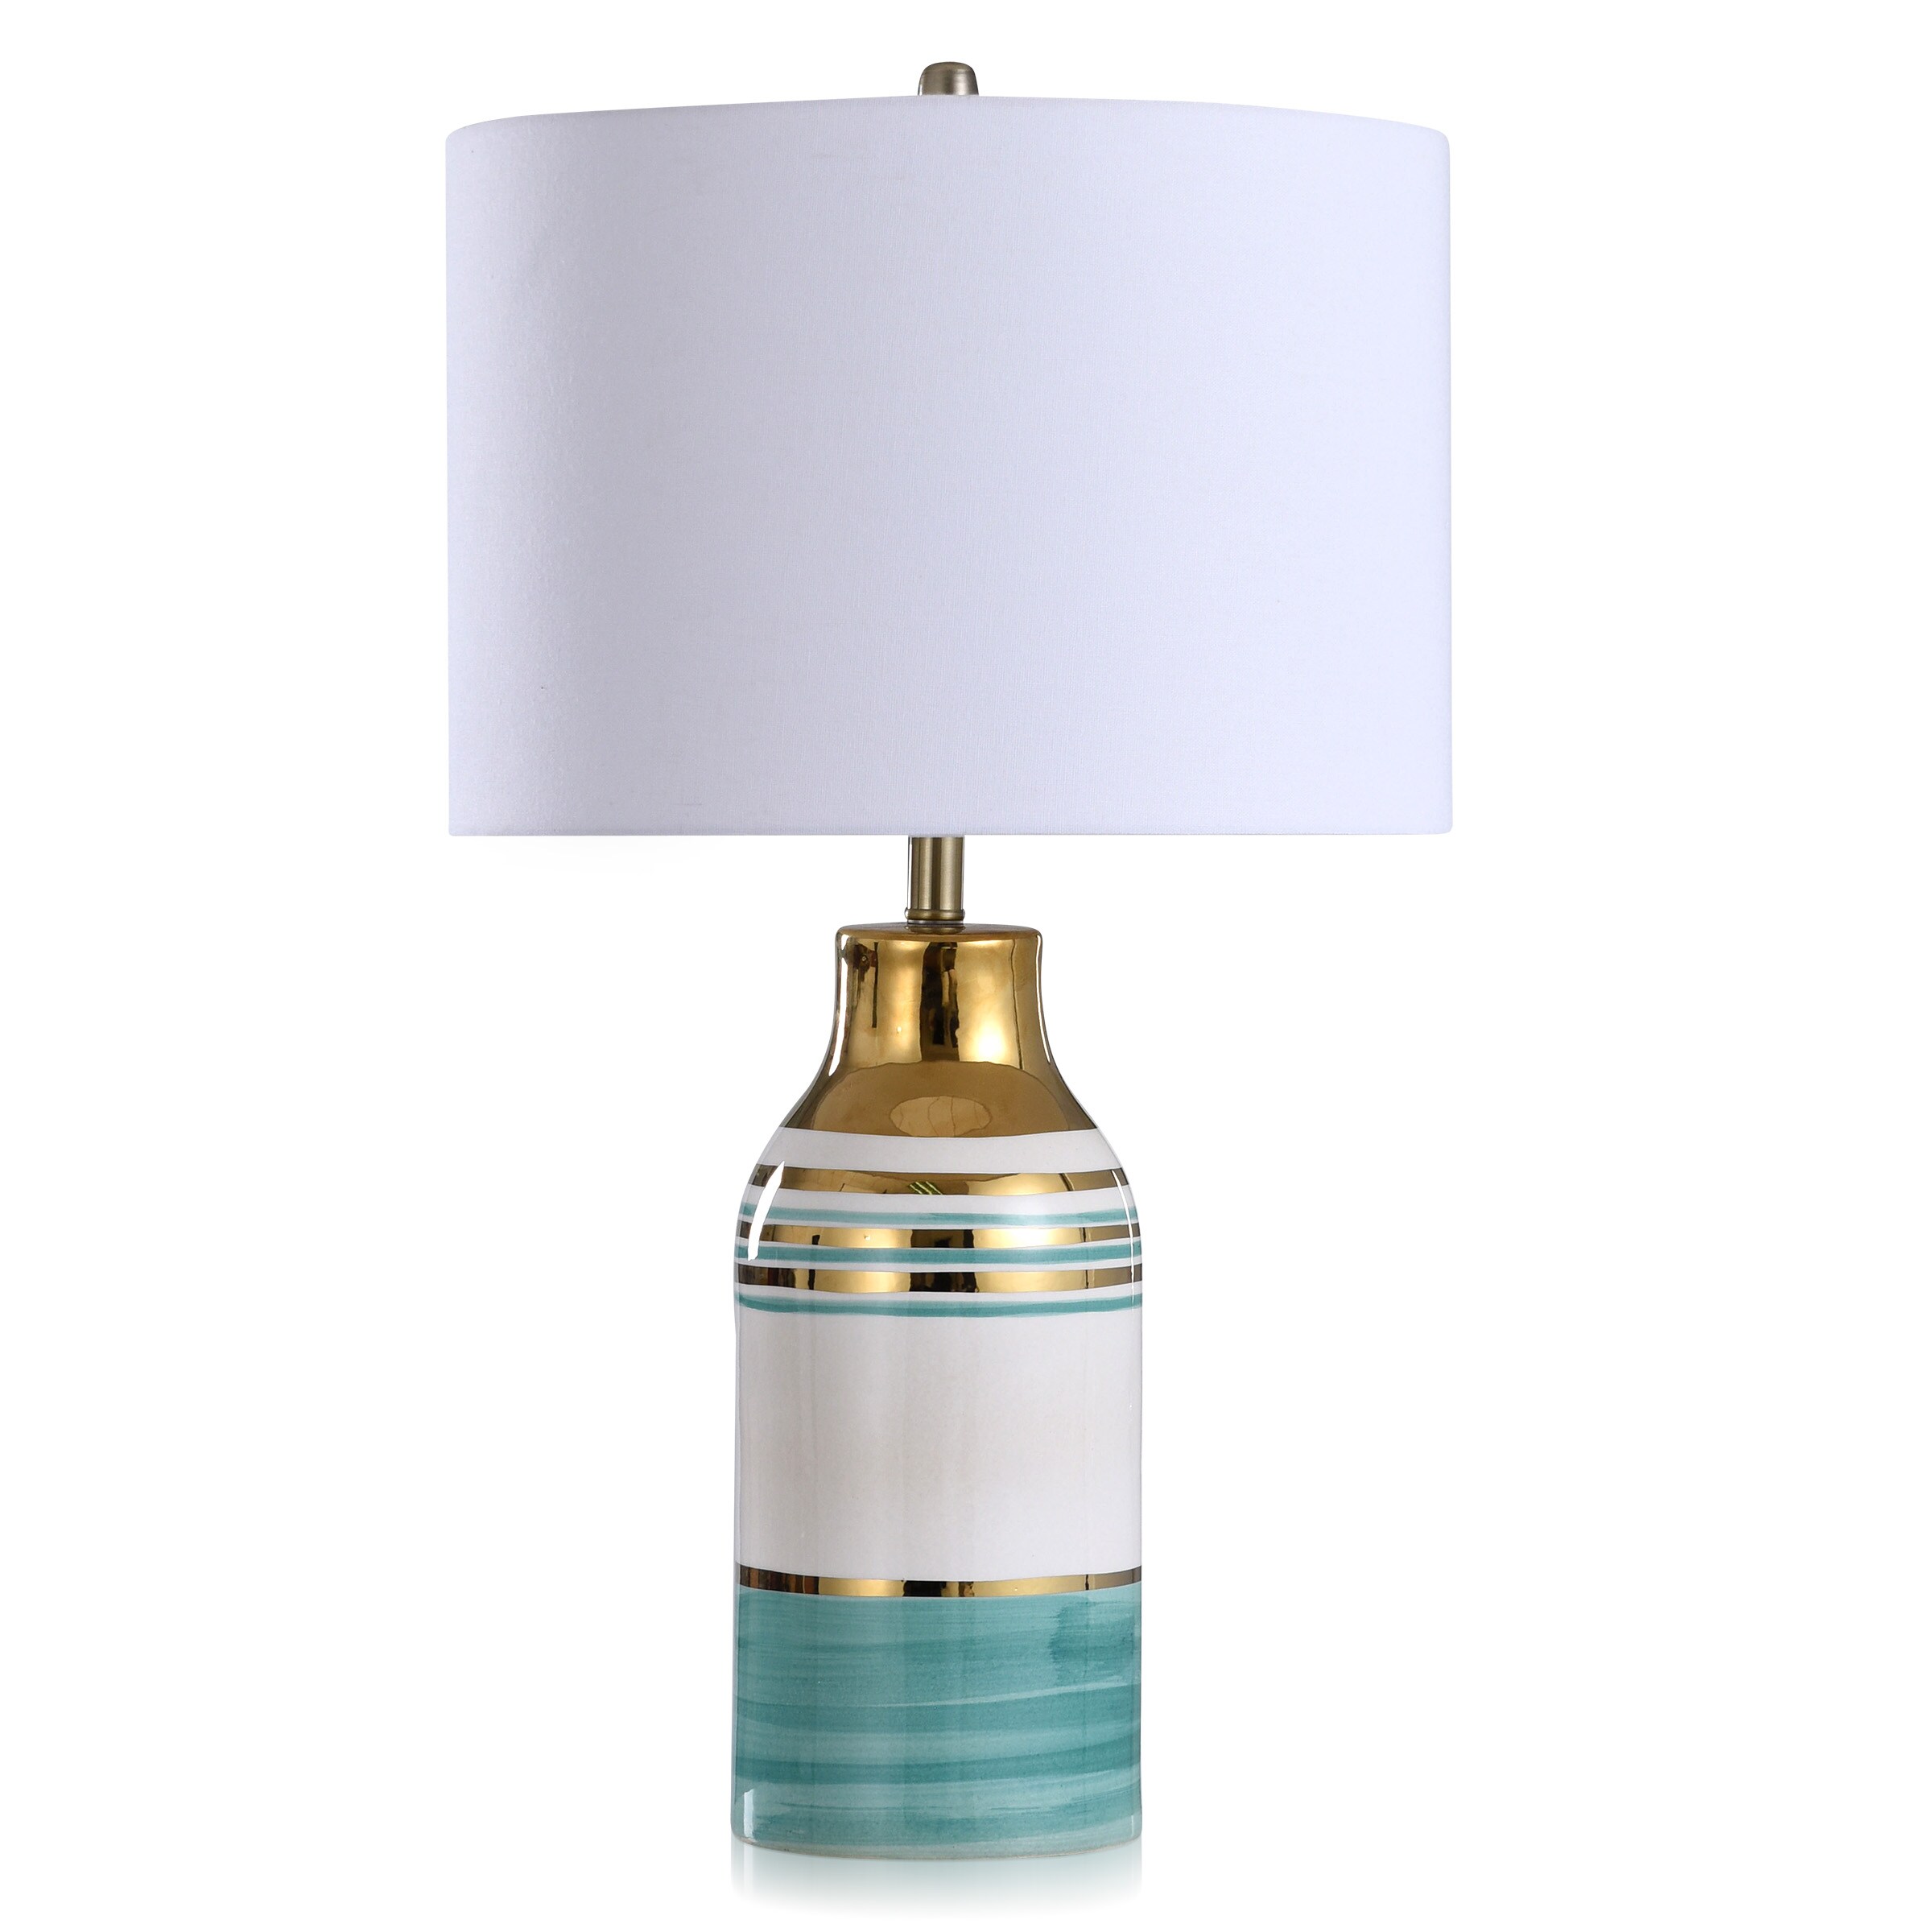 vergeven Overtekenen Raffinaderij StyleCraft Home Collection Cameron - Multi-Colored Milk Jar Ceramic Body  Table Lamp - Mint Finish - White Shade in the Table Lamps department at  Lowes.com